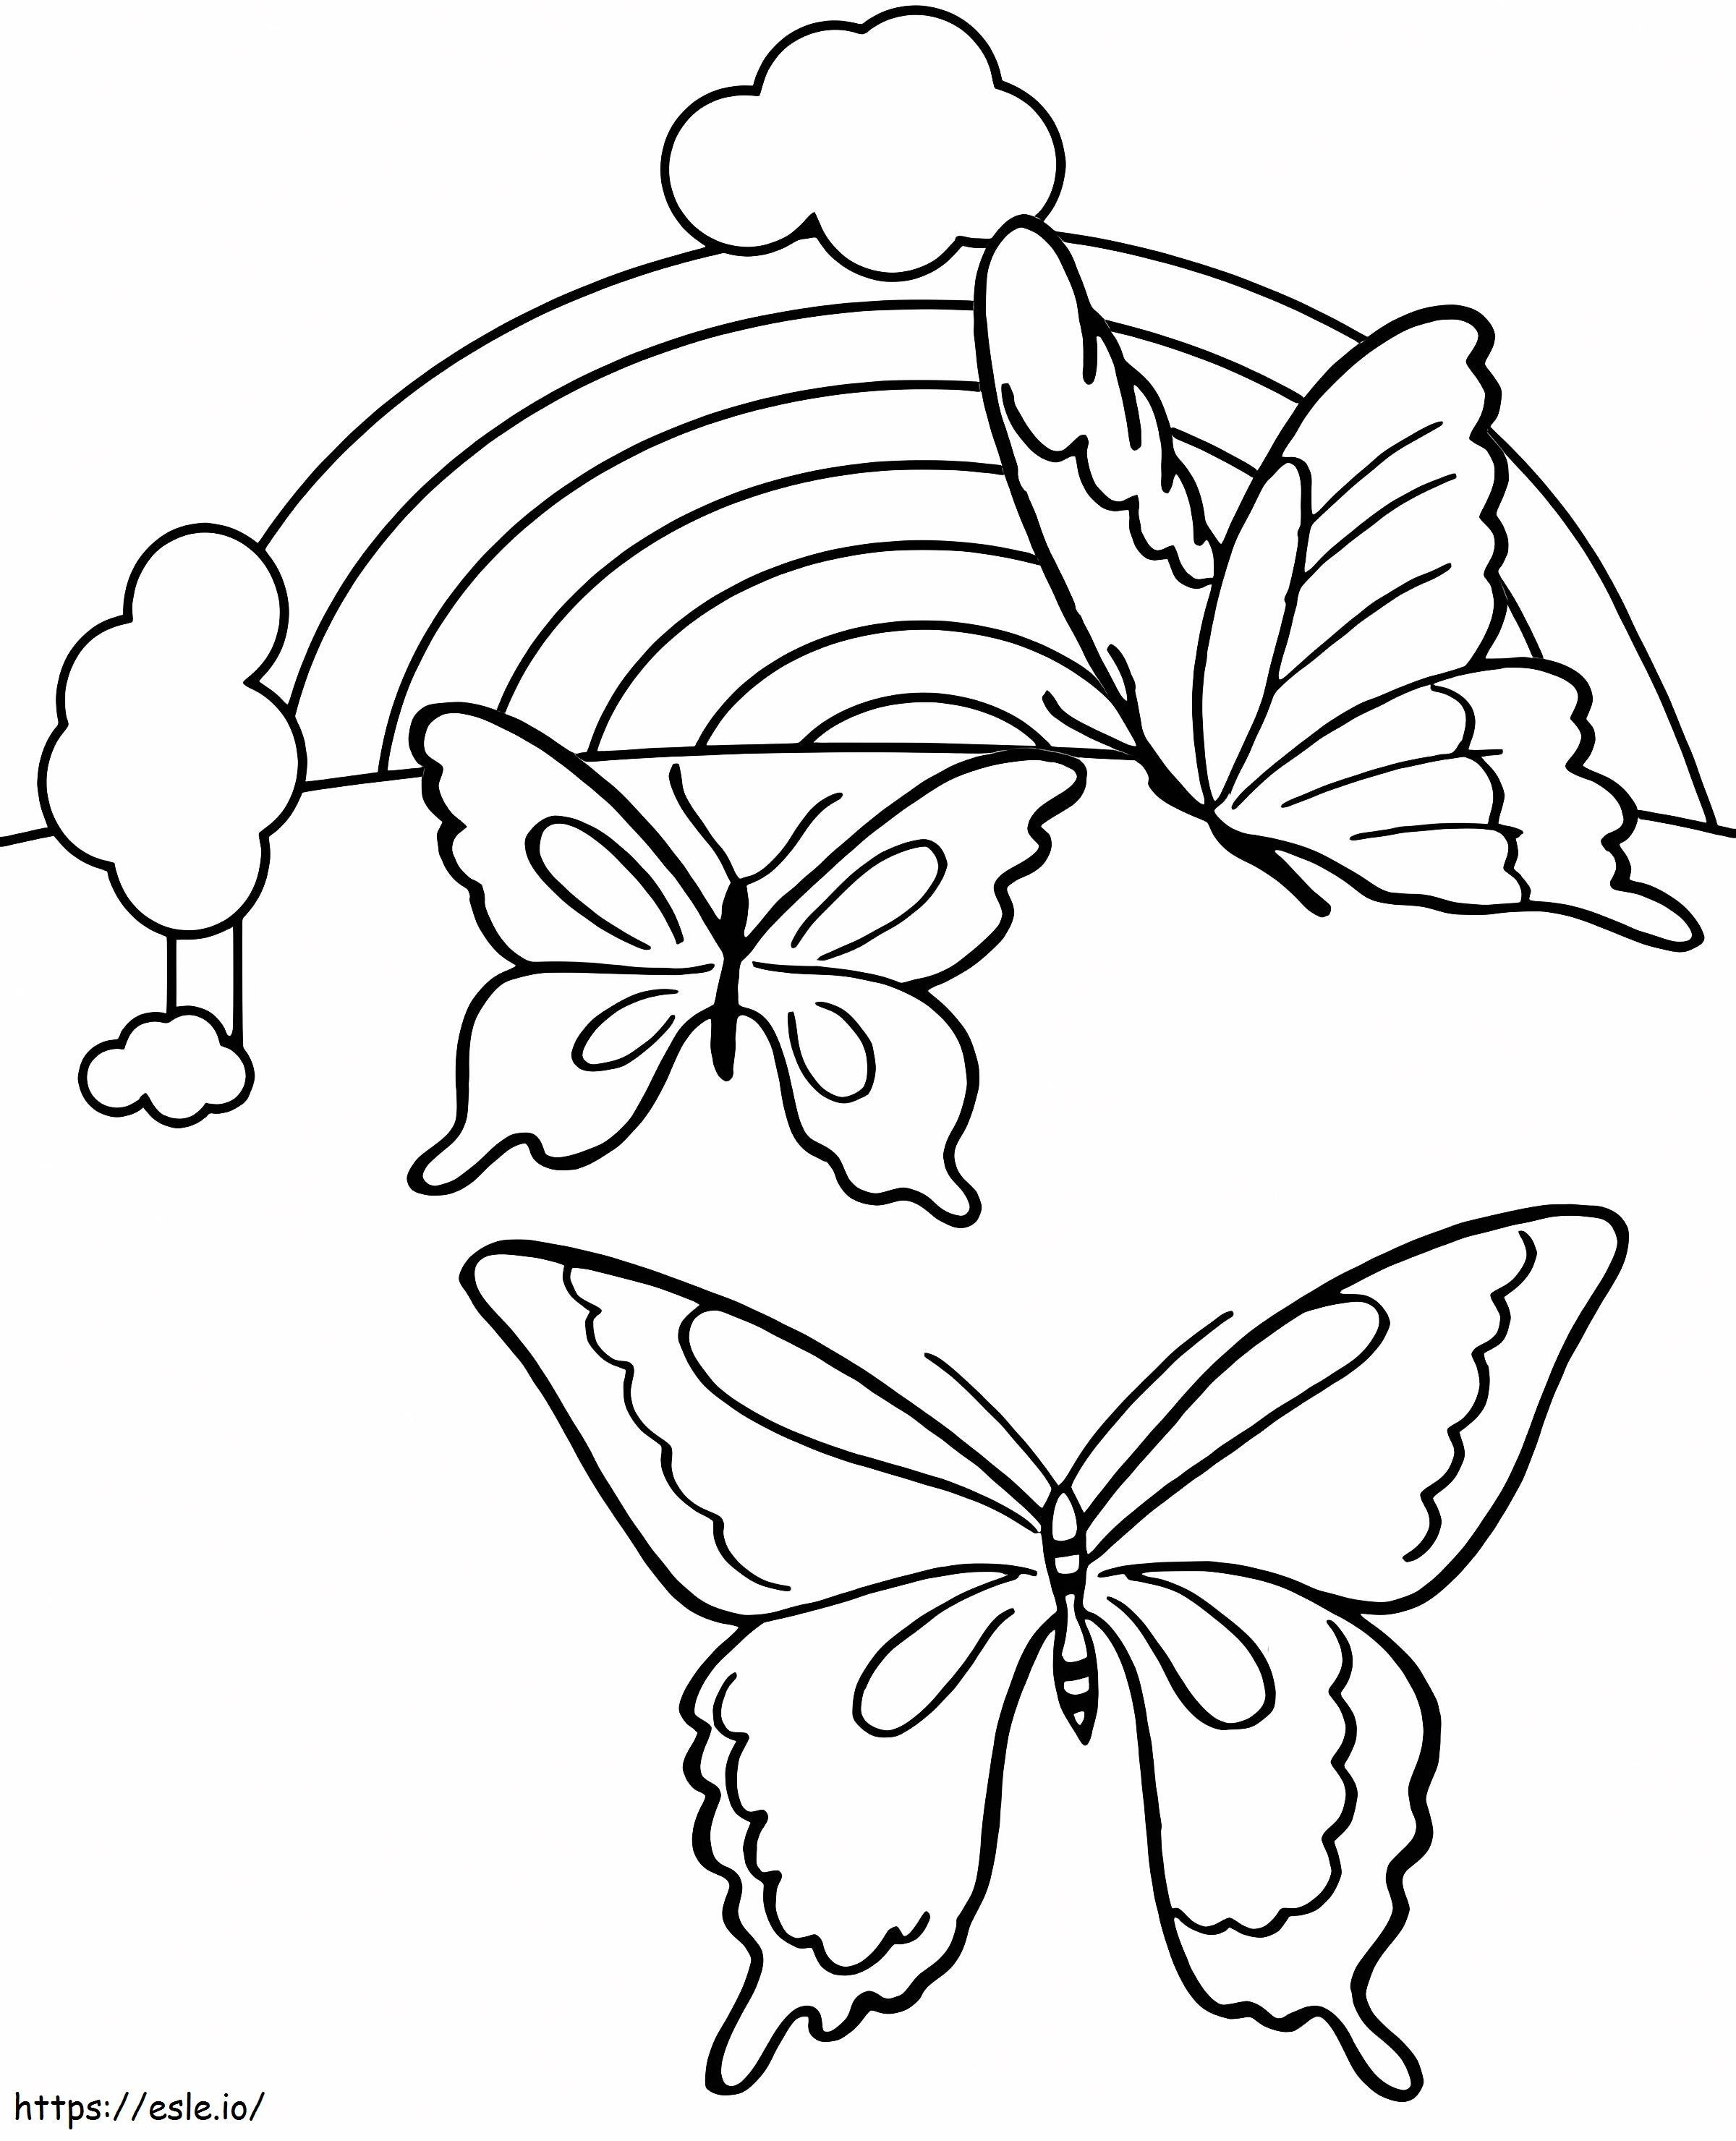 Rainbow And Butterflies coloring page